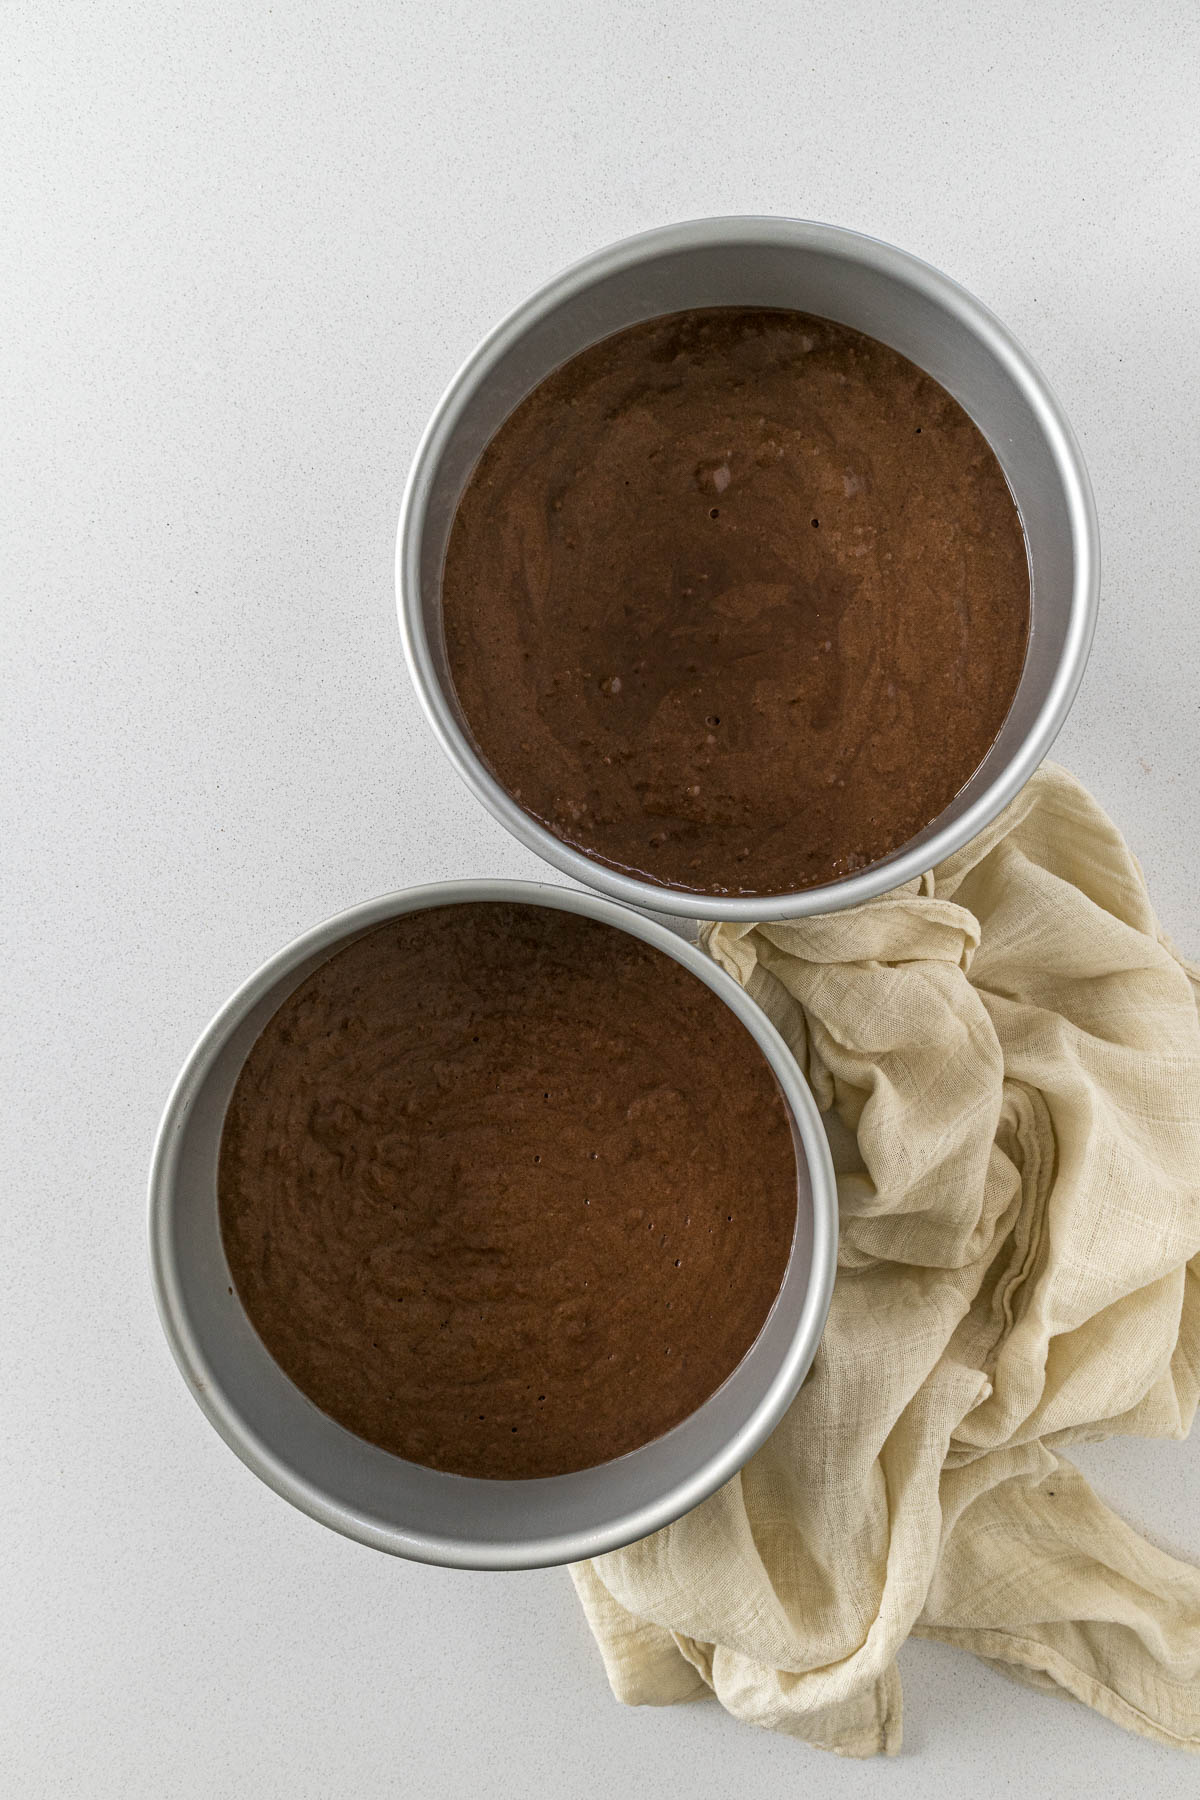 Chocolate cake batter divided between two cake pans.